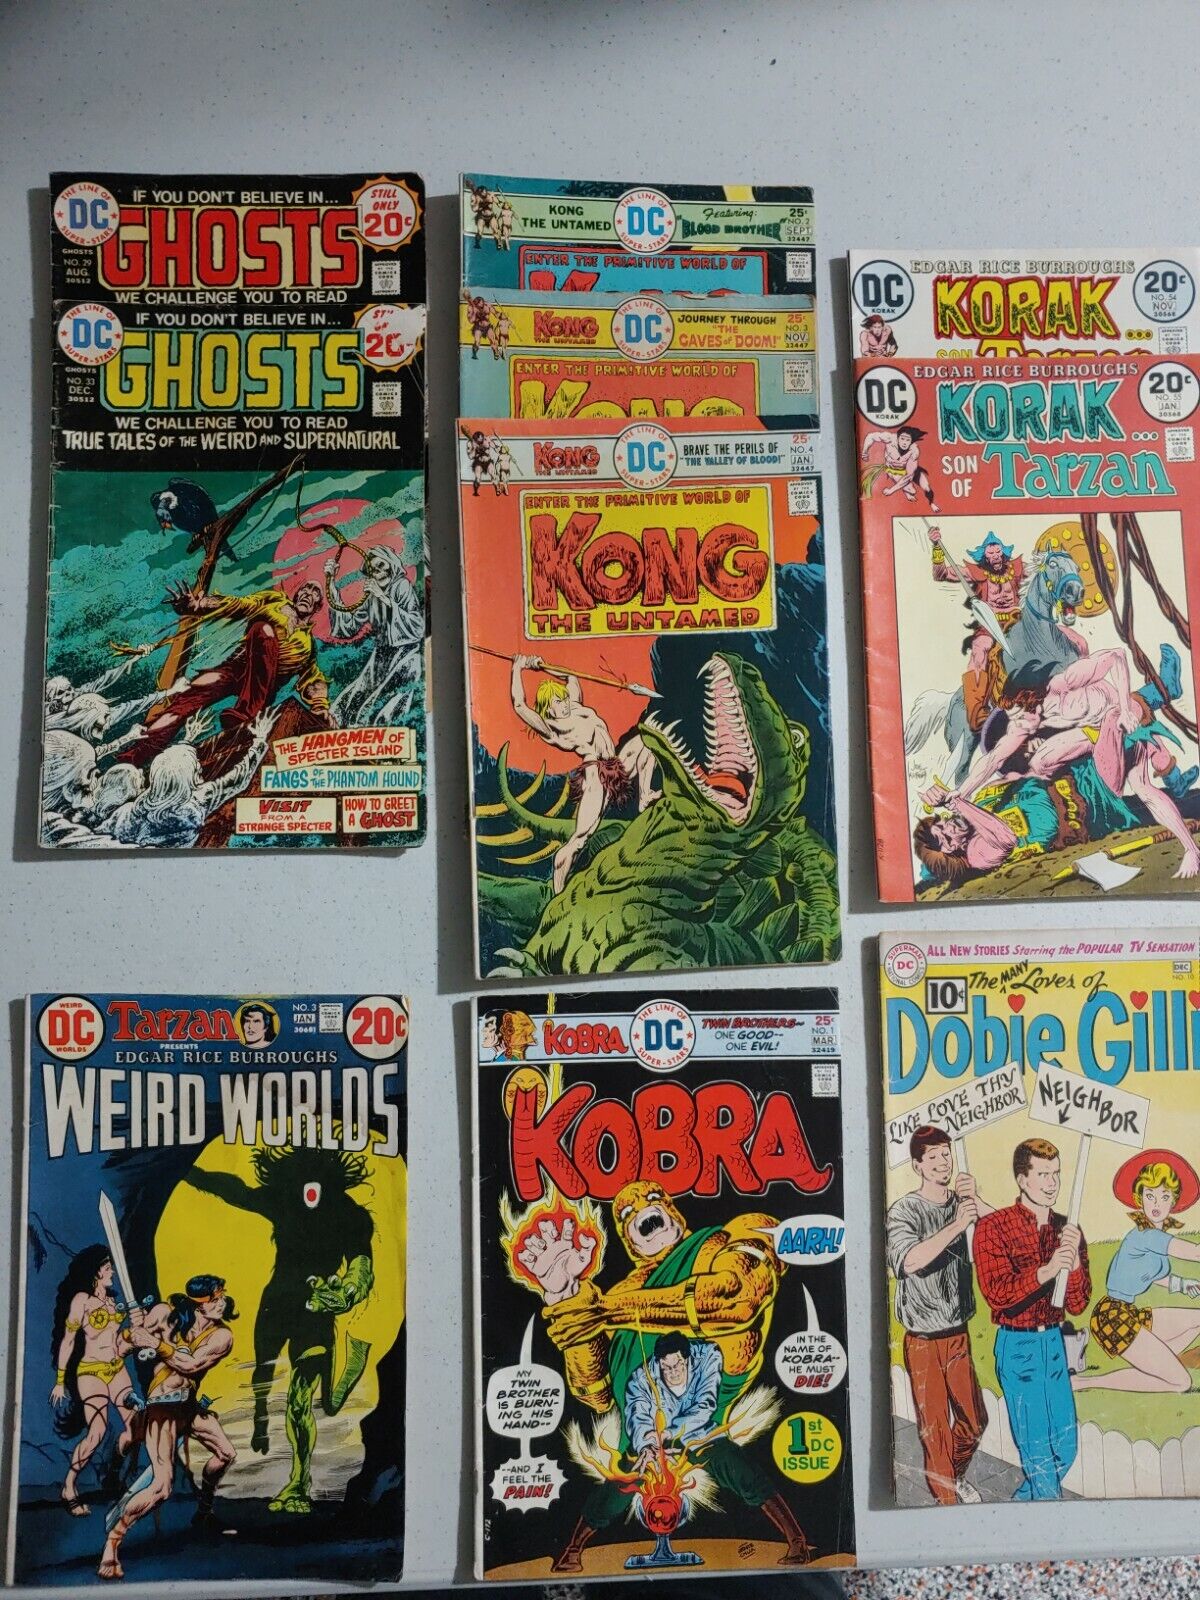 DC Vintage Comics - Assorted Lot Of 10 - Kong, Ghosts, Moral, Weird Worlds...